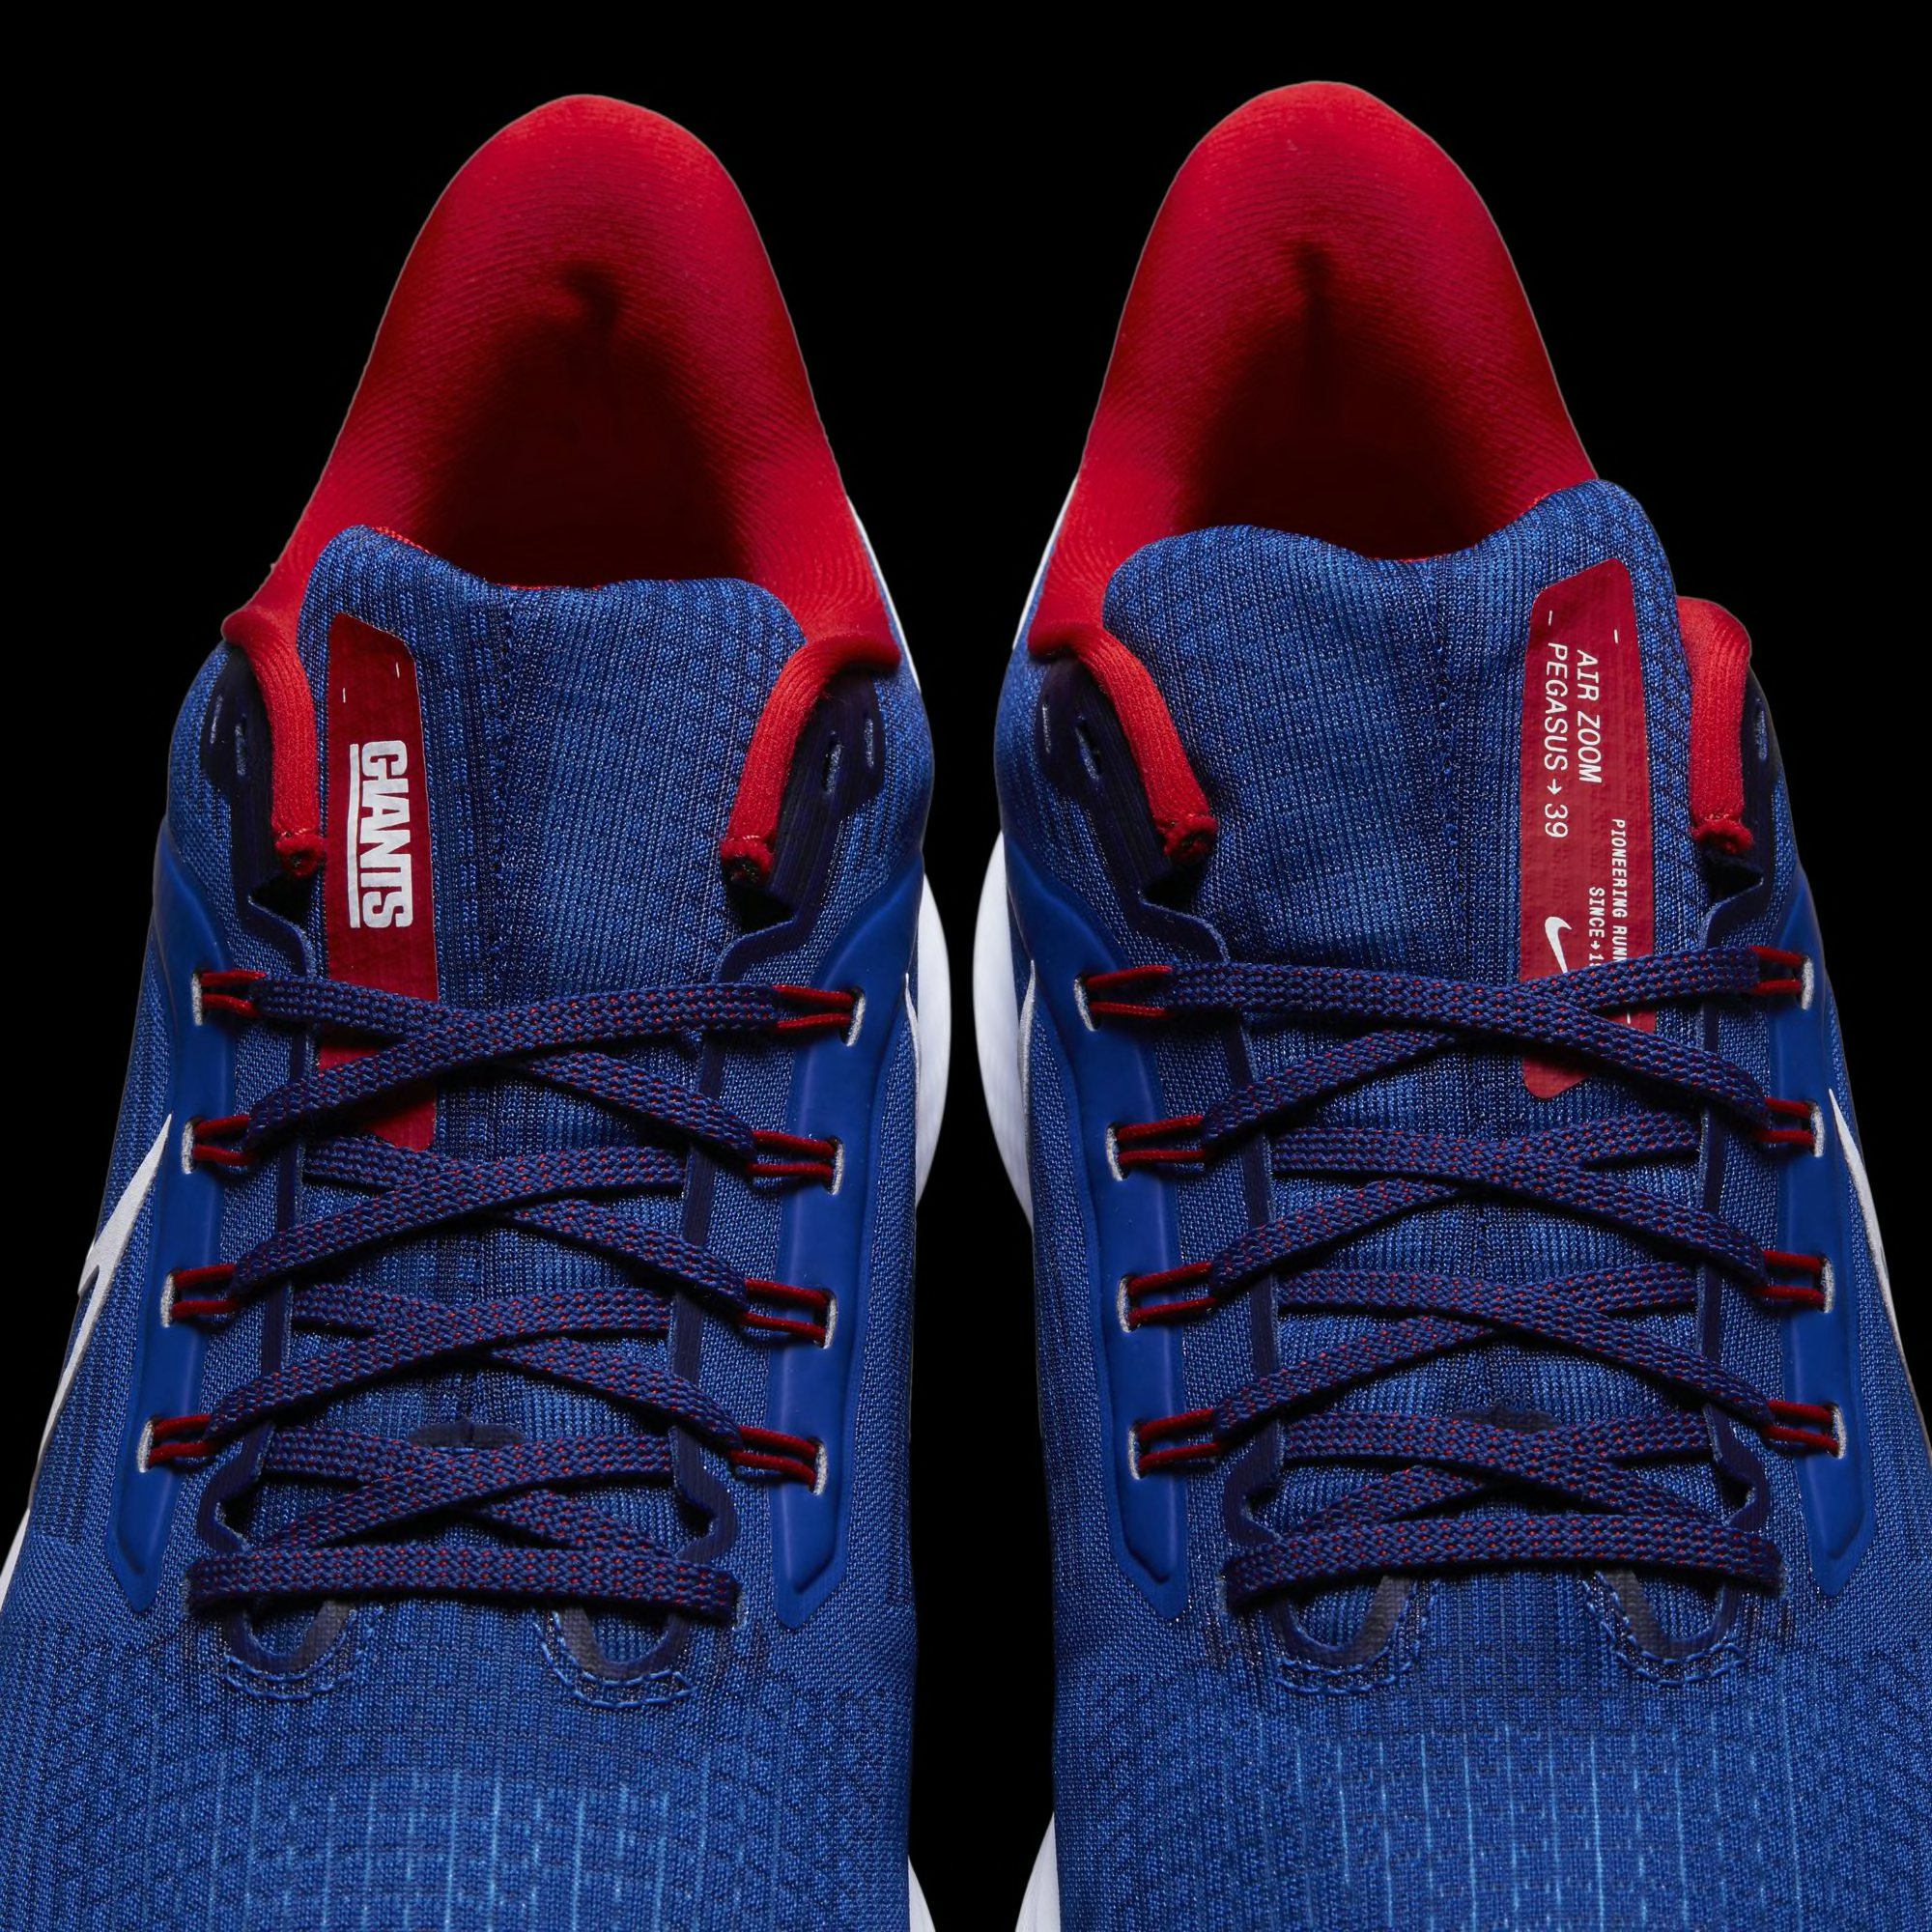 Dar derechos posponer Reino Fans need these New York Giants shoes by Nike